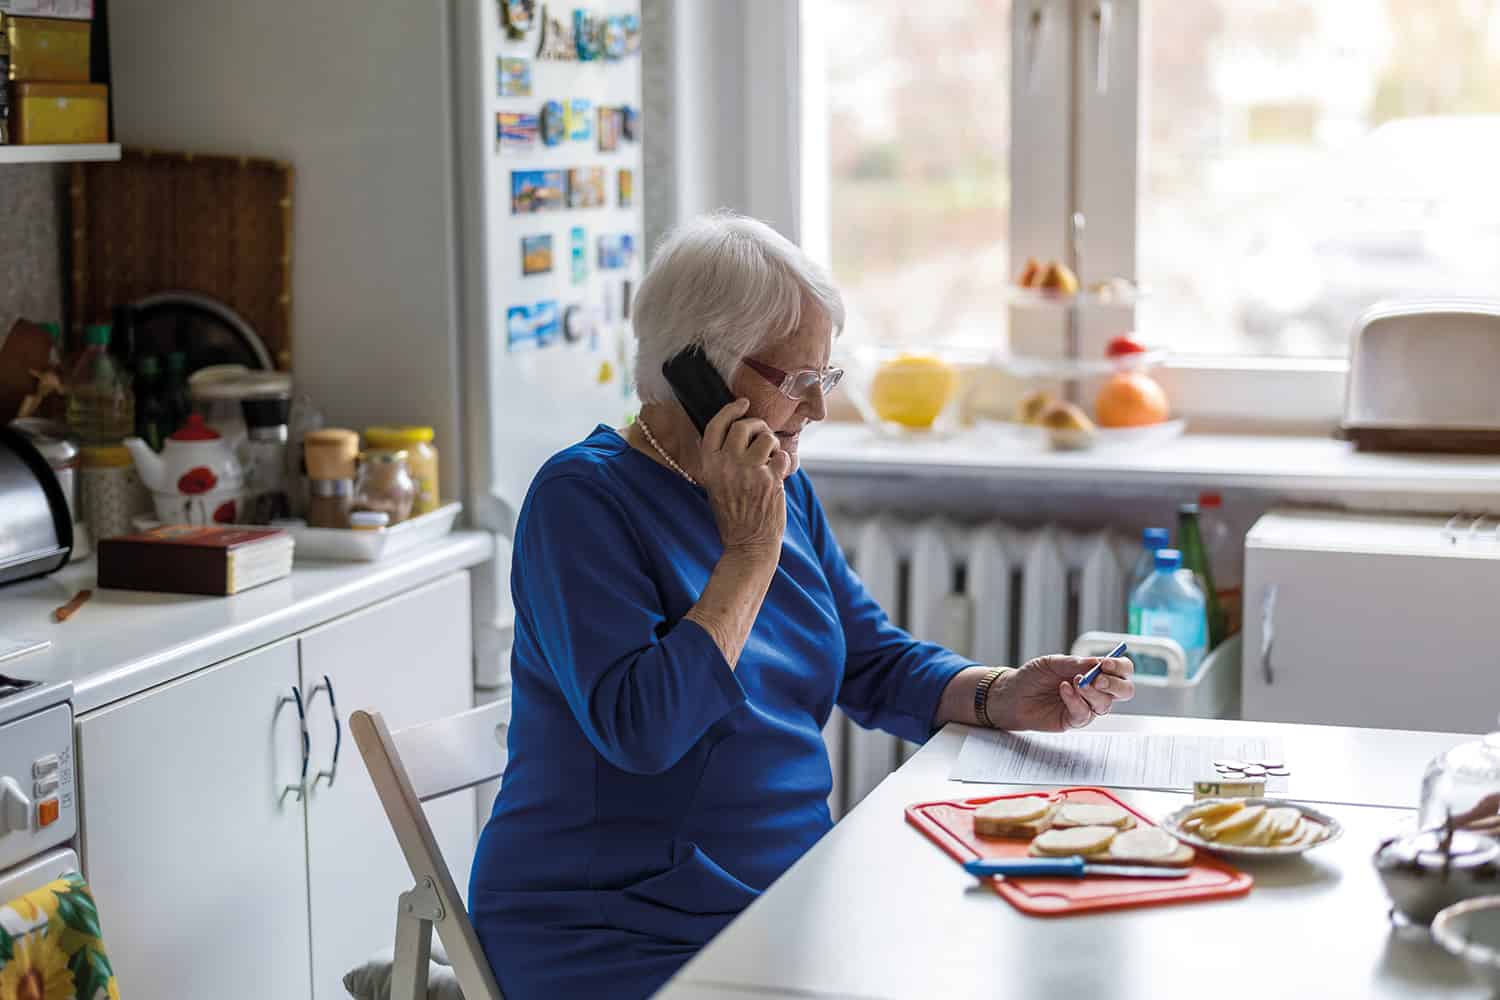 An elderly lady sat at the kitchen table on the telephone.